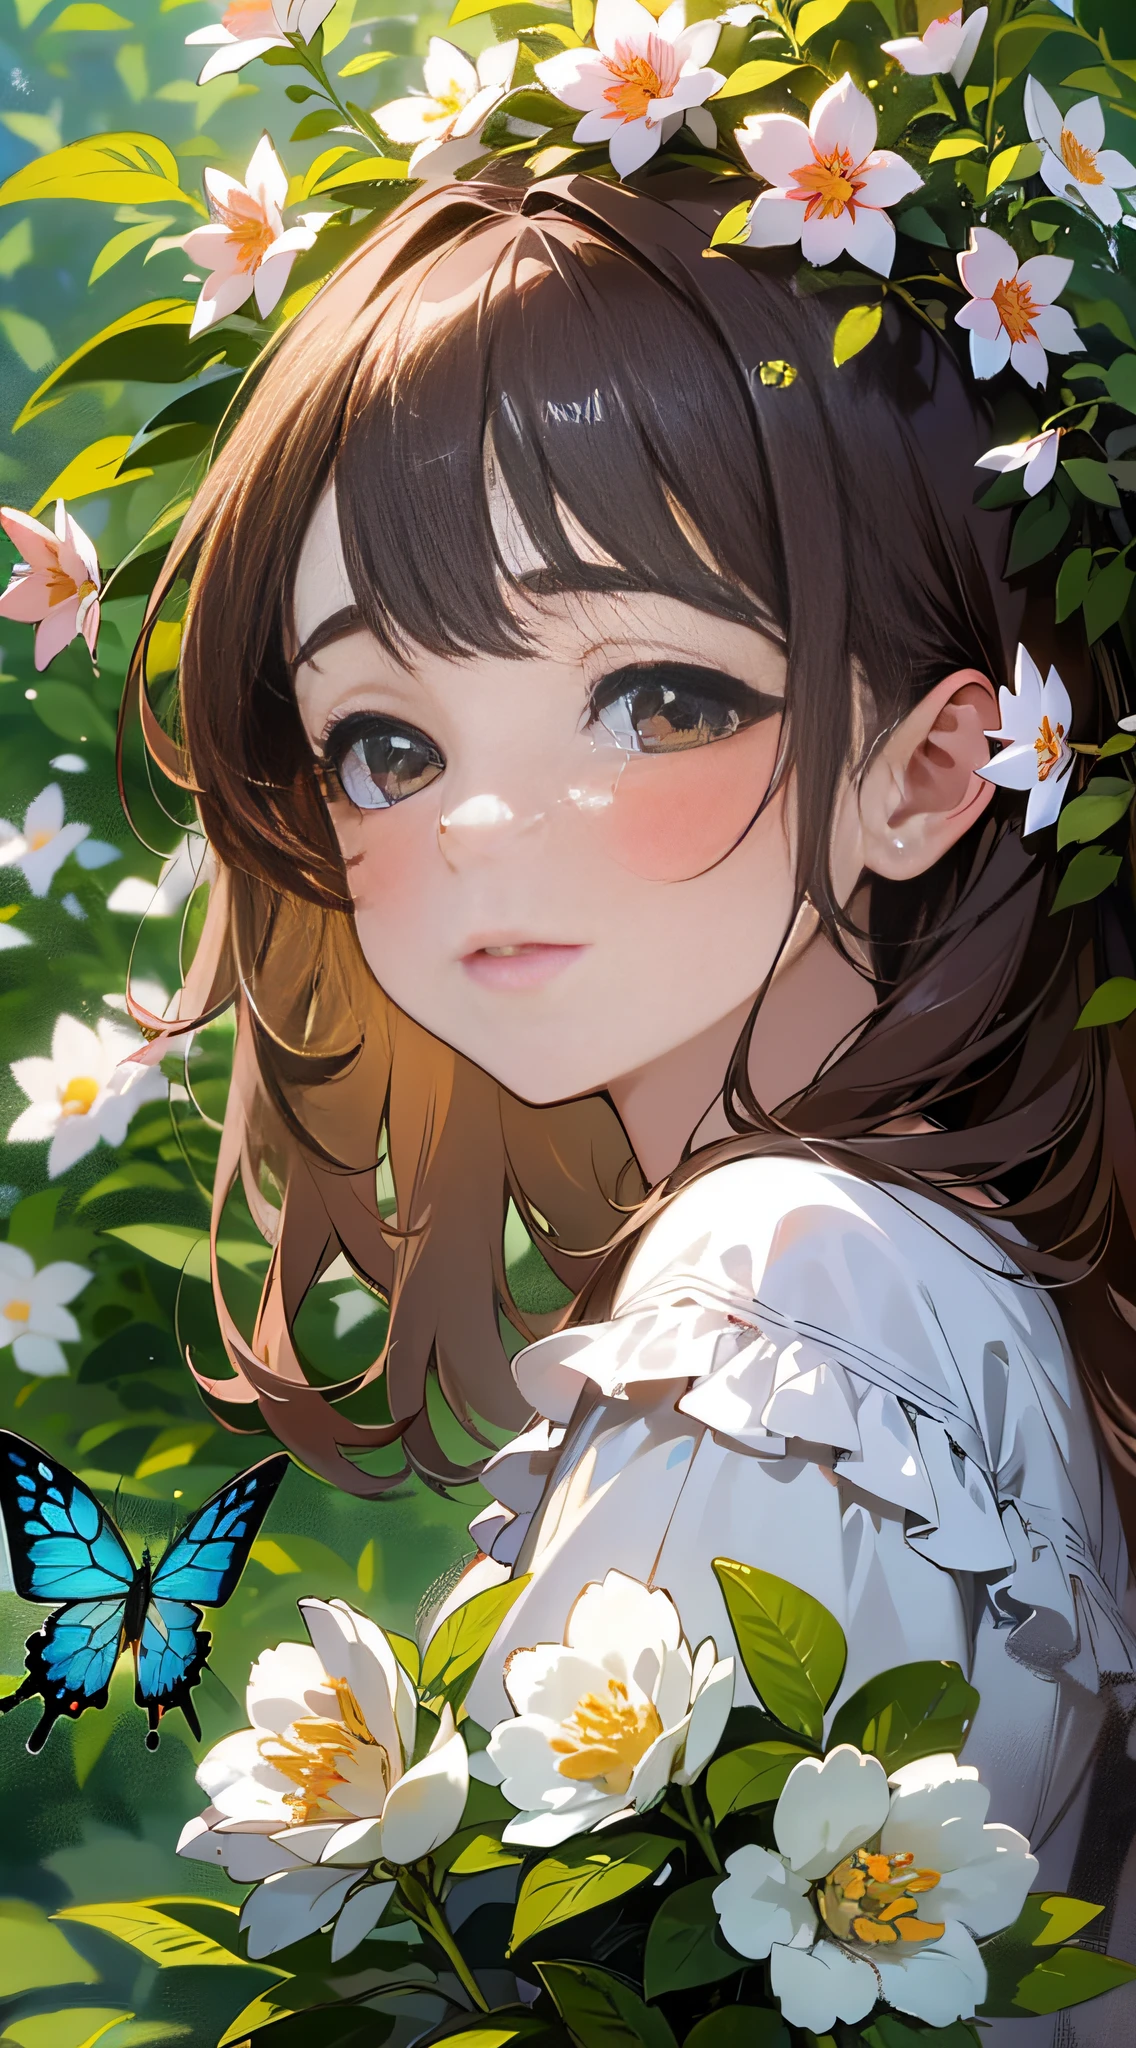 (best quality, masterpiece, ultra-realistic), portrait of 1 beautiful and delicate girl, with a soft and peaceful expression, the background scenery is a garden with flowering bushes and butterflies flying around.